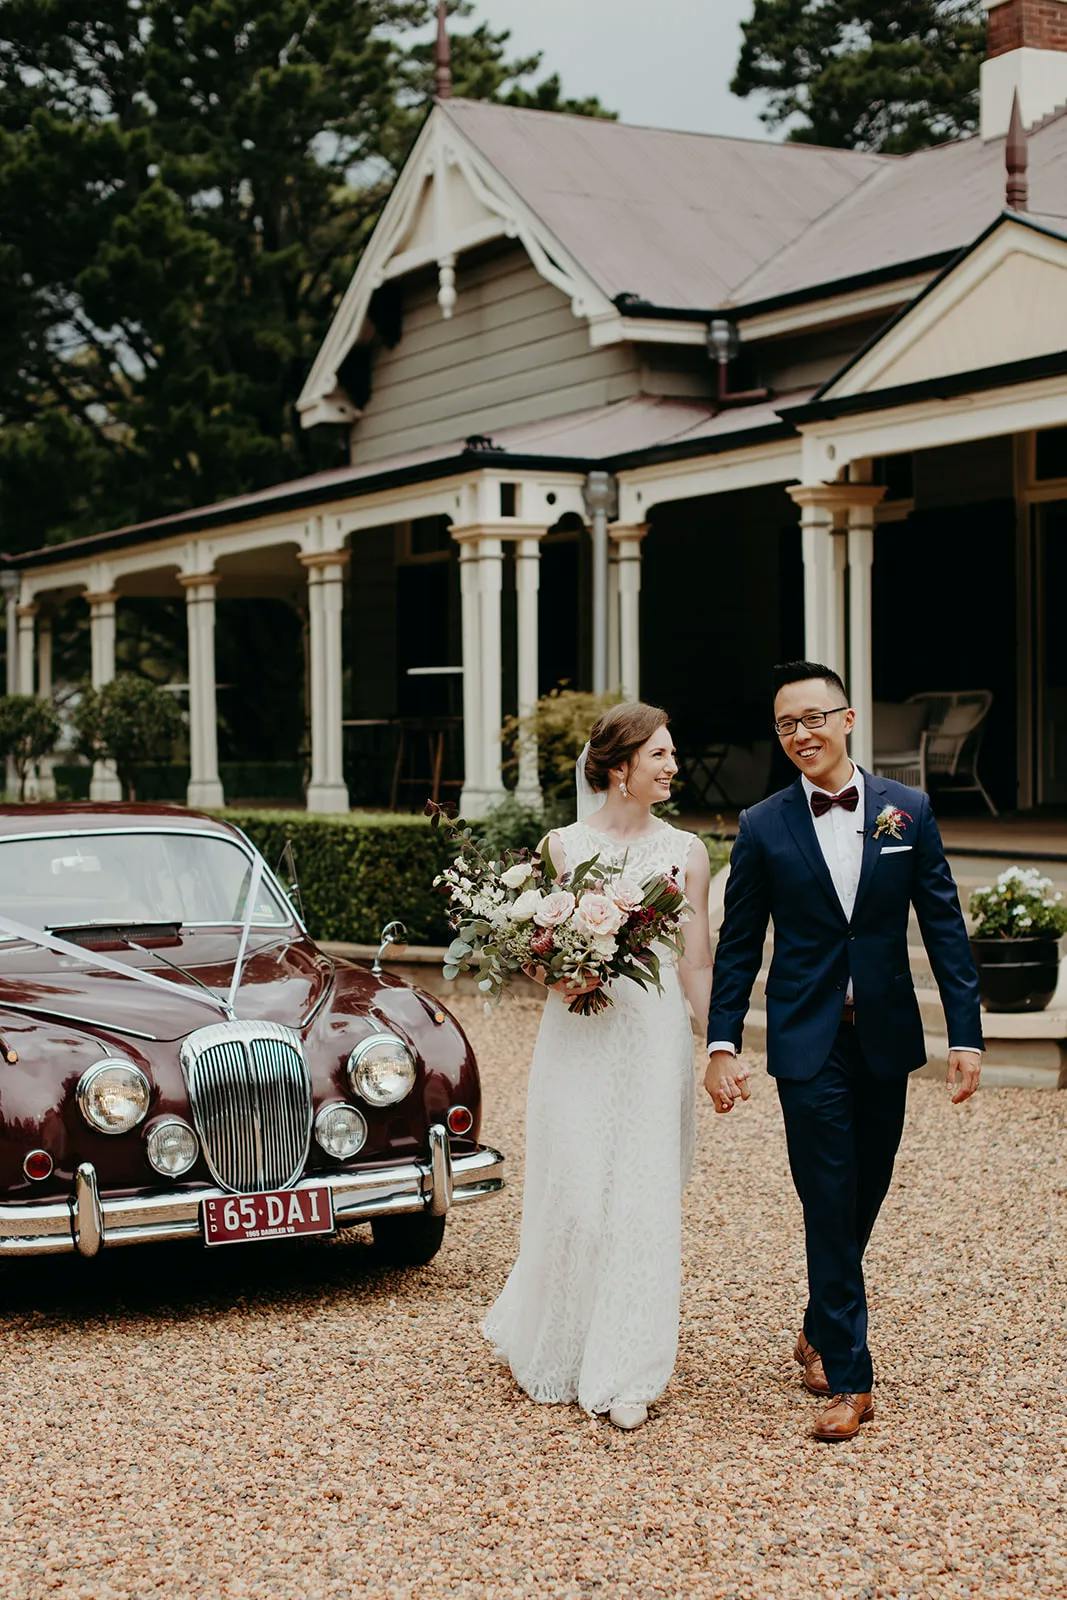 A bride in a white dress holding a bouquet and a groom in a navy suit walk hand in hand in front of a vintage car and a large house with a covered porch and columns. They both appear happy, with the groom looking at the bride and smiling.